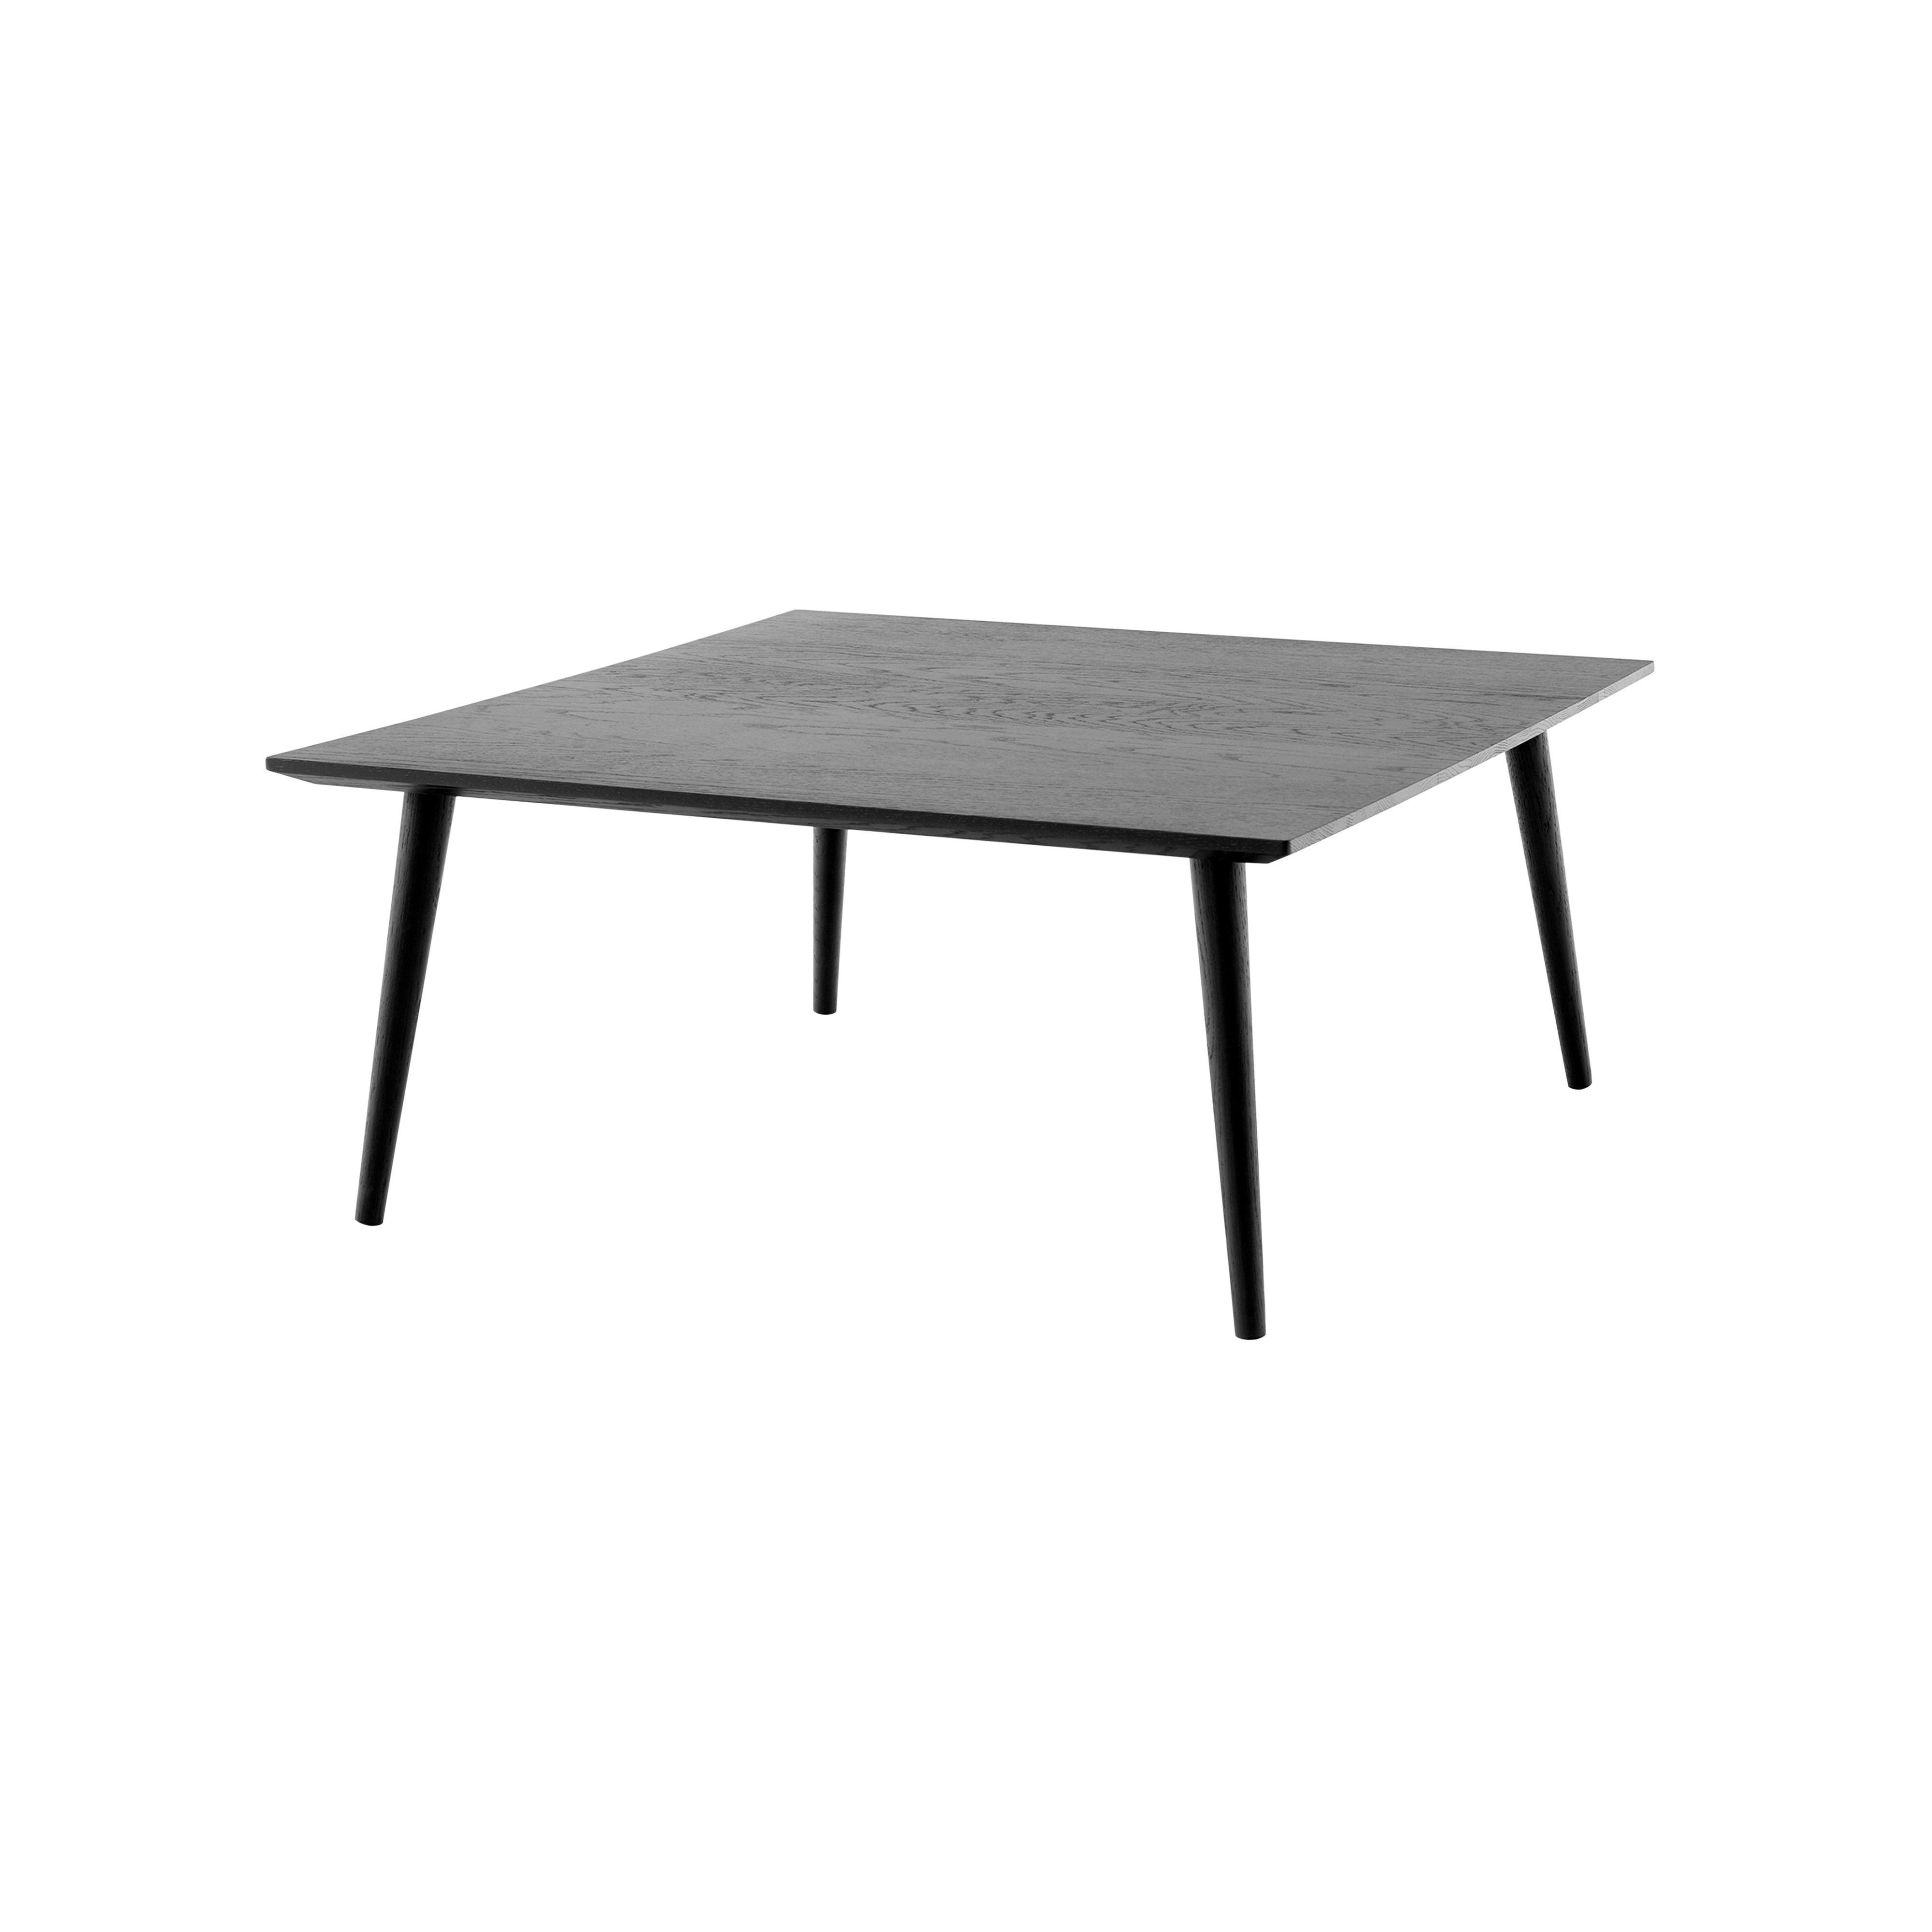 In Between Lounge Table: SK23 + SK24 + Square (SK24) + Black Lacquered Oak